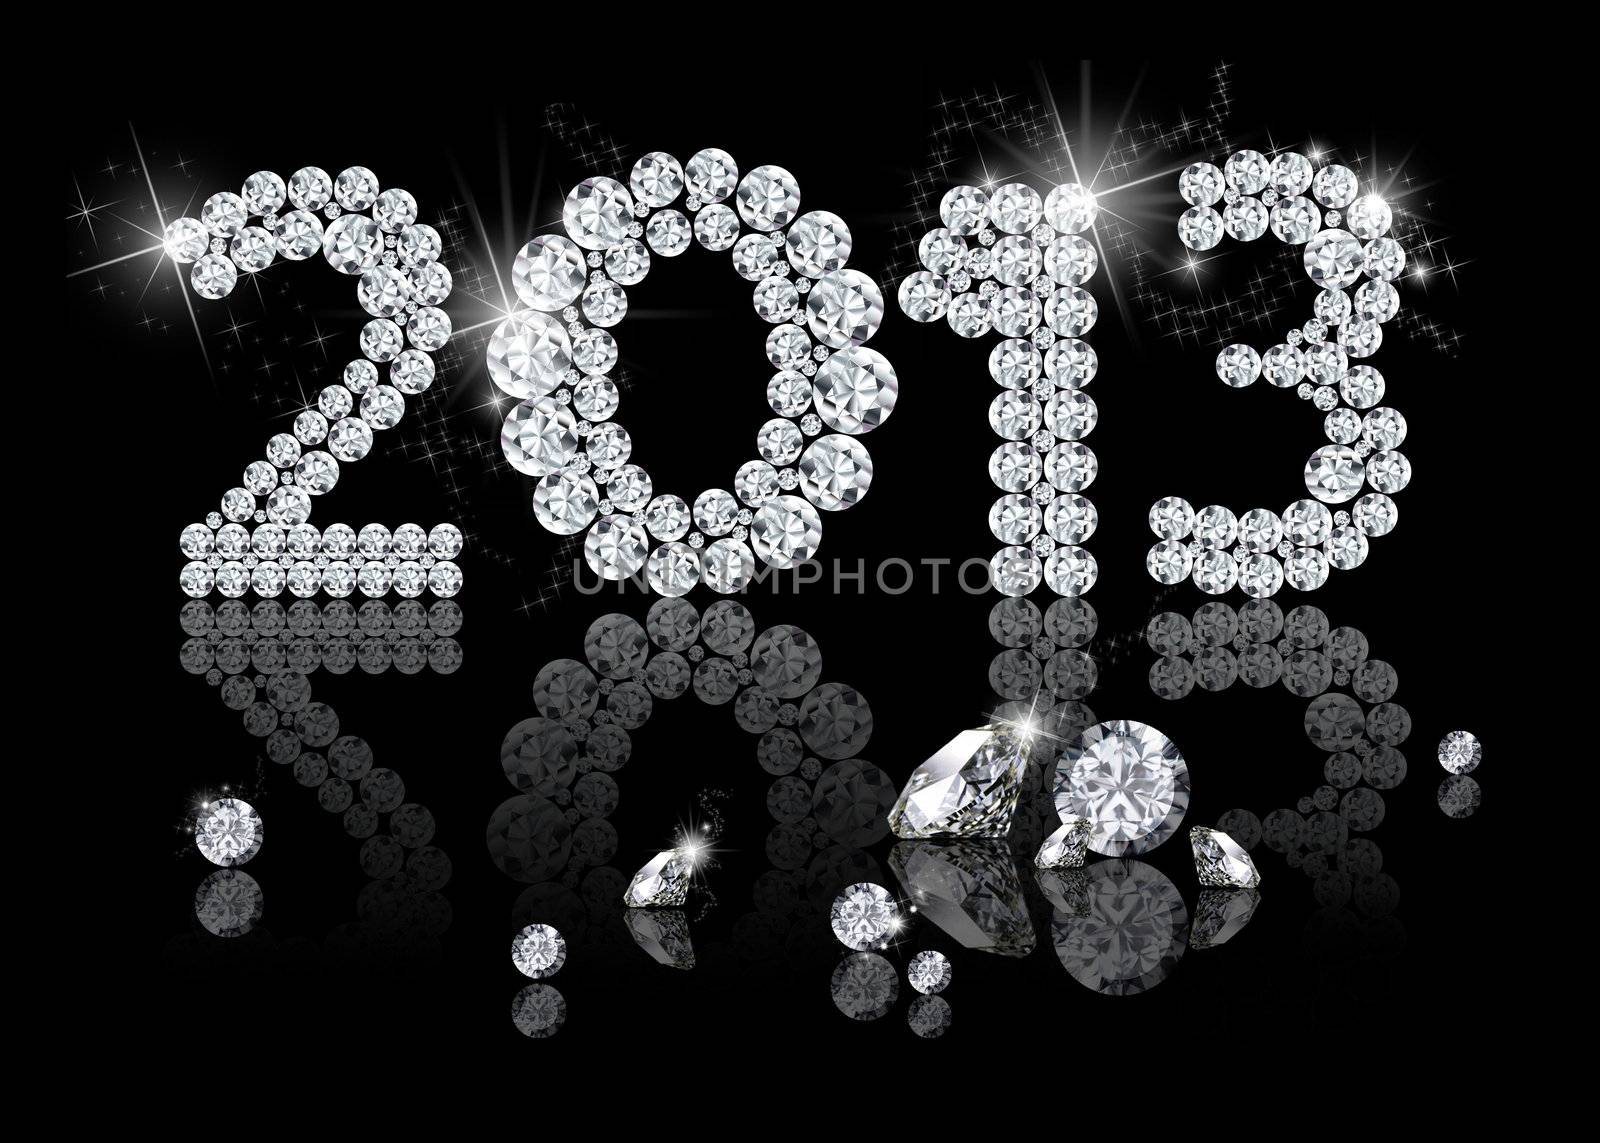 Brilliant New Year 2013 is a diamond jewelry illustration on a black background.